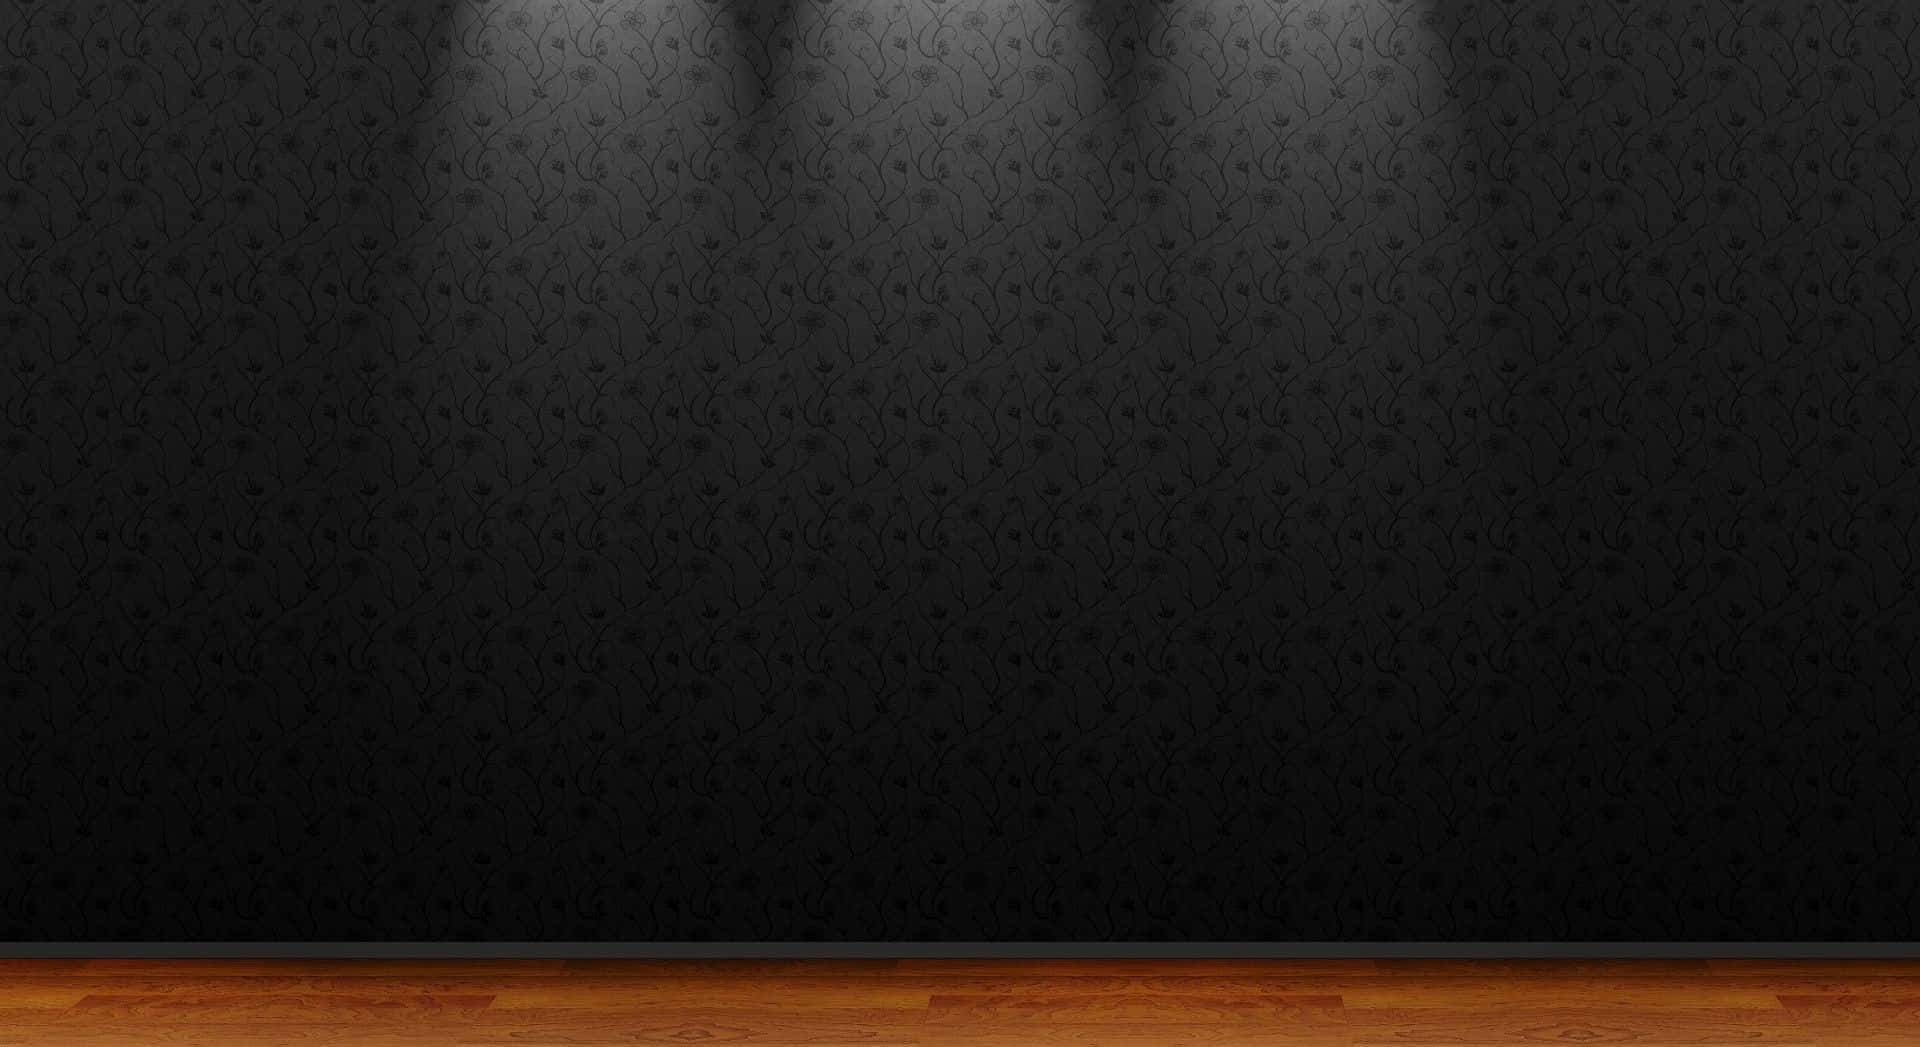 A Black Wall With Spotlights And Wooden Floor